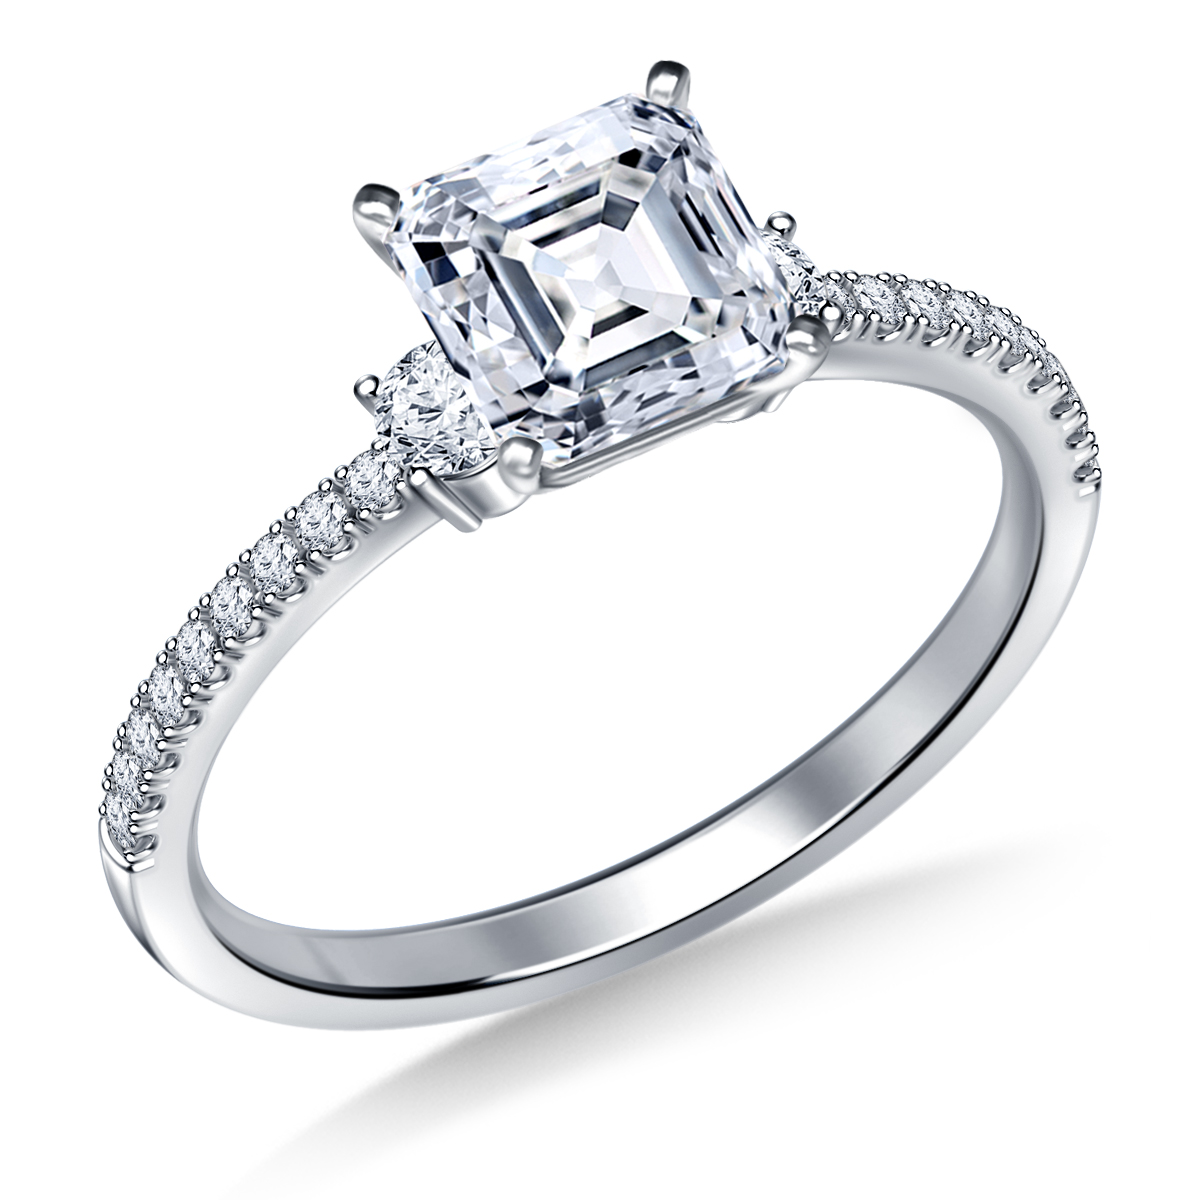 Petite Trio Diamond Engagement Ring  with Prong Details in 14K White Gold